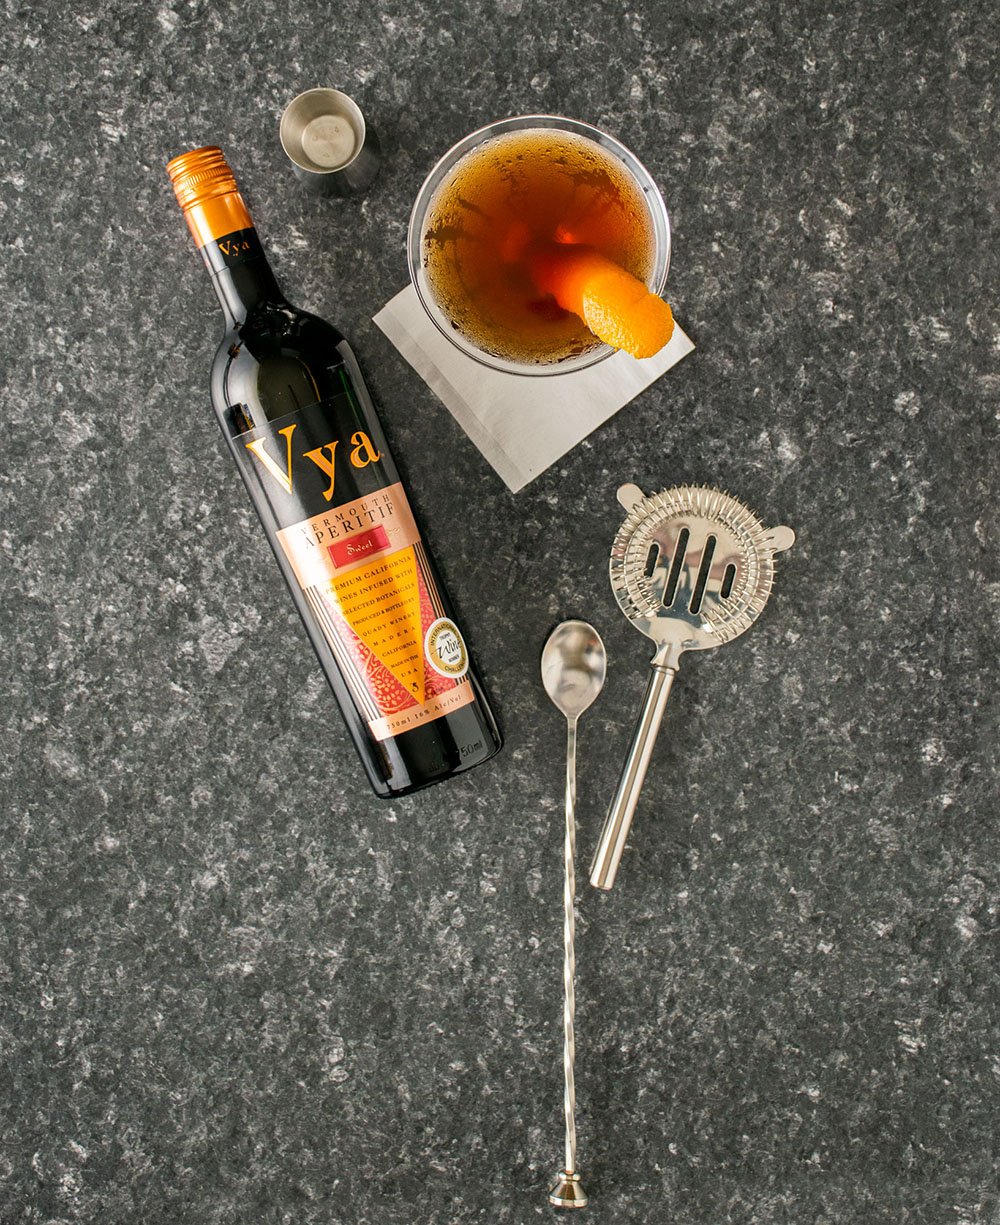 Vya Sweet Vermouth bottle with a Manhattan cocktail garnished with an orange slice.